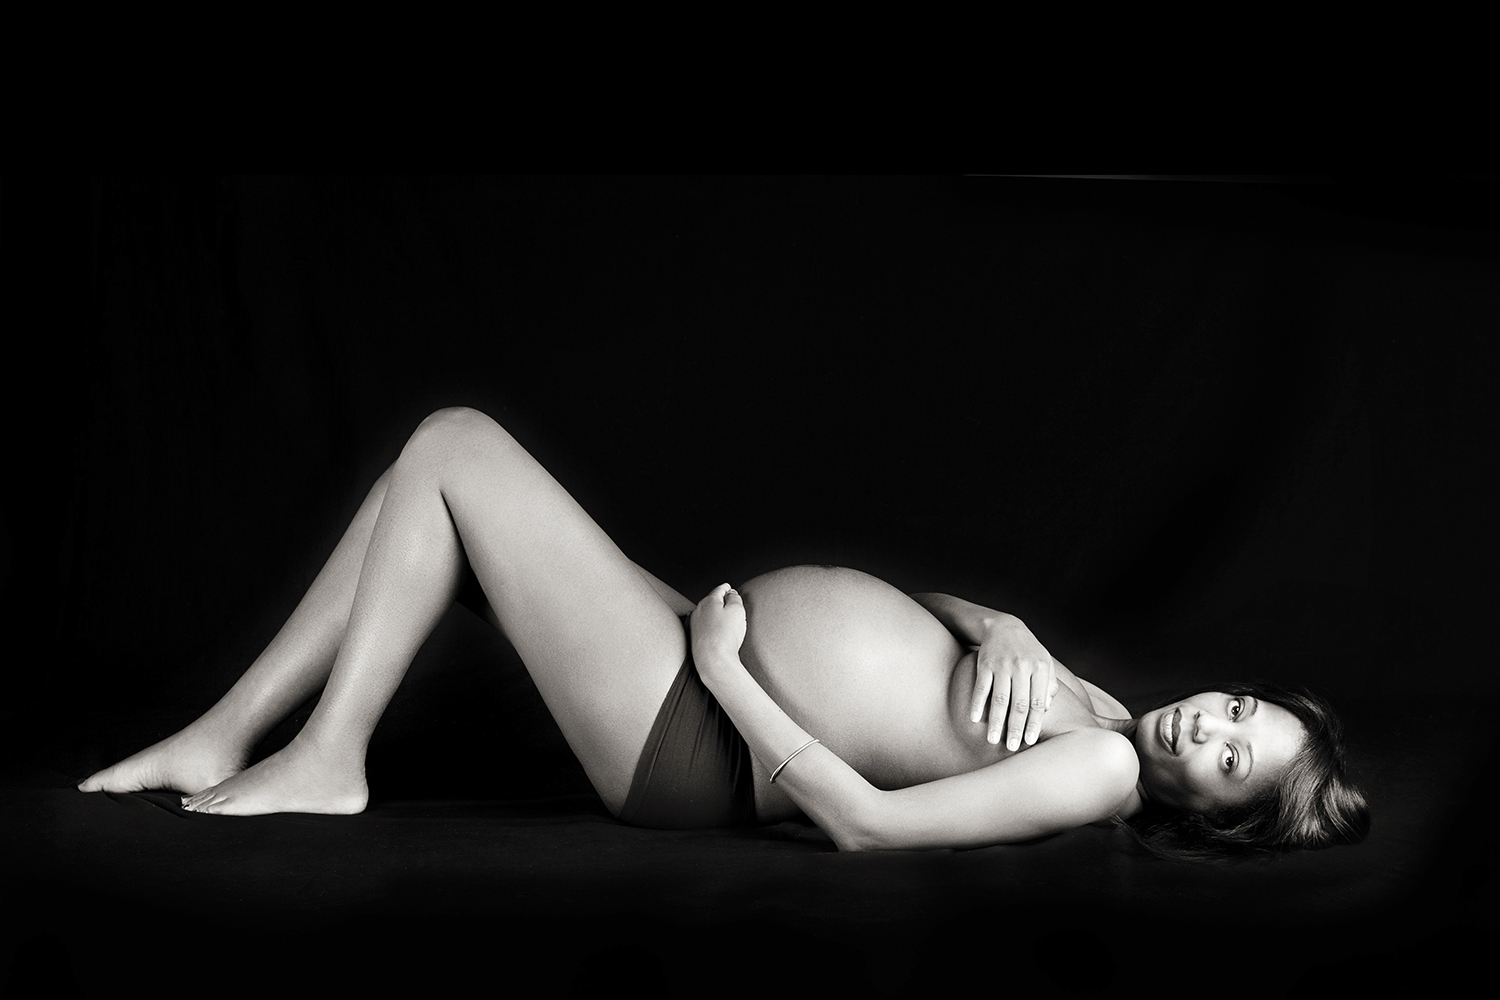 A classic black and white image of a pregnant woman, emphasizing the simplicity and natural beauty.